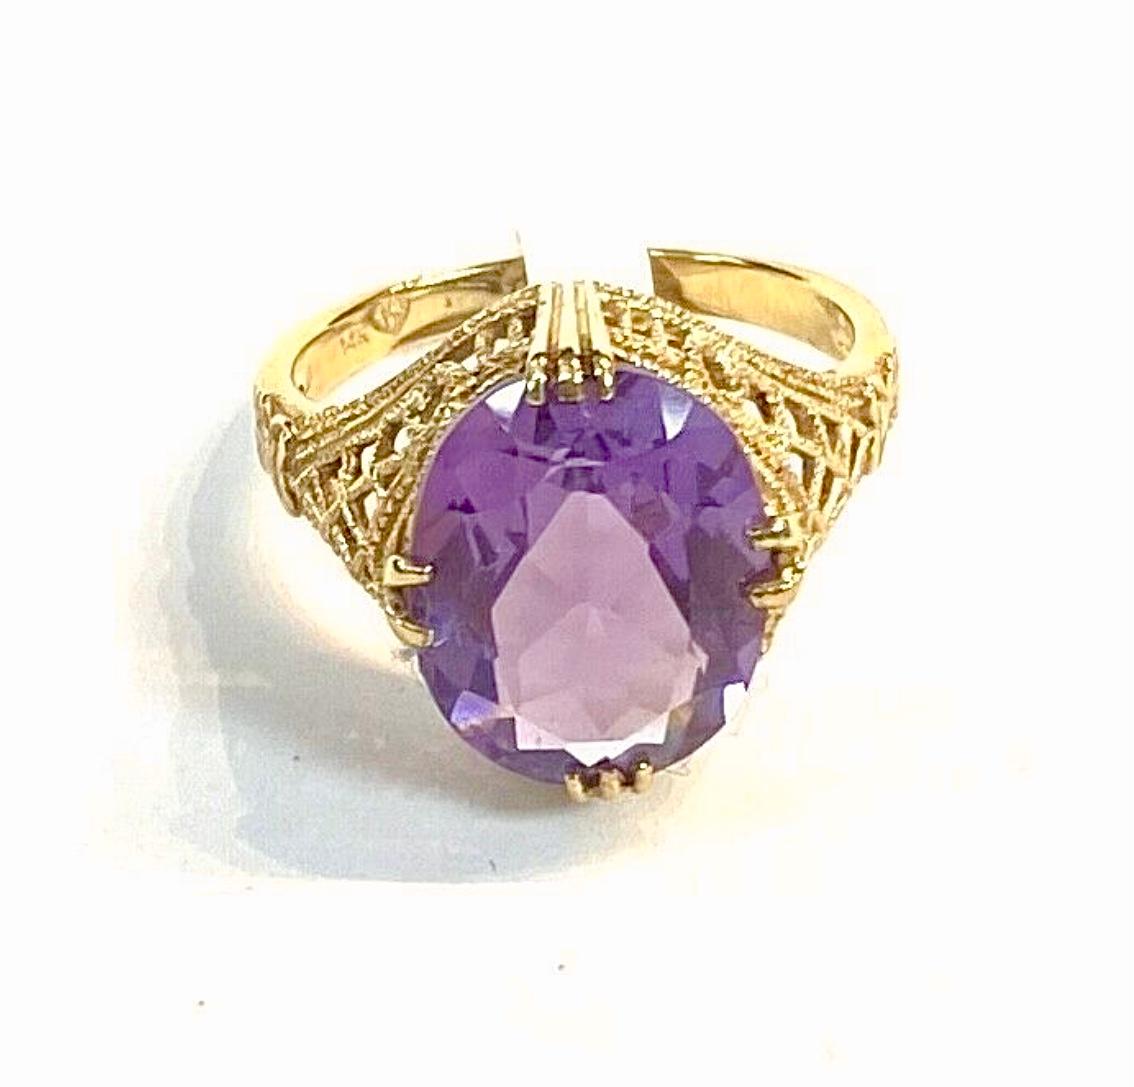 14k yellow gold oval Amethyst ring, 4.89 Grams TW. The dimensions of the oval amethyst are approximately 14 mm x 9.5 mm. Approximately 5.0 carats. Marked14k. Approximate size 7.5.